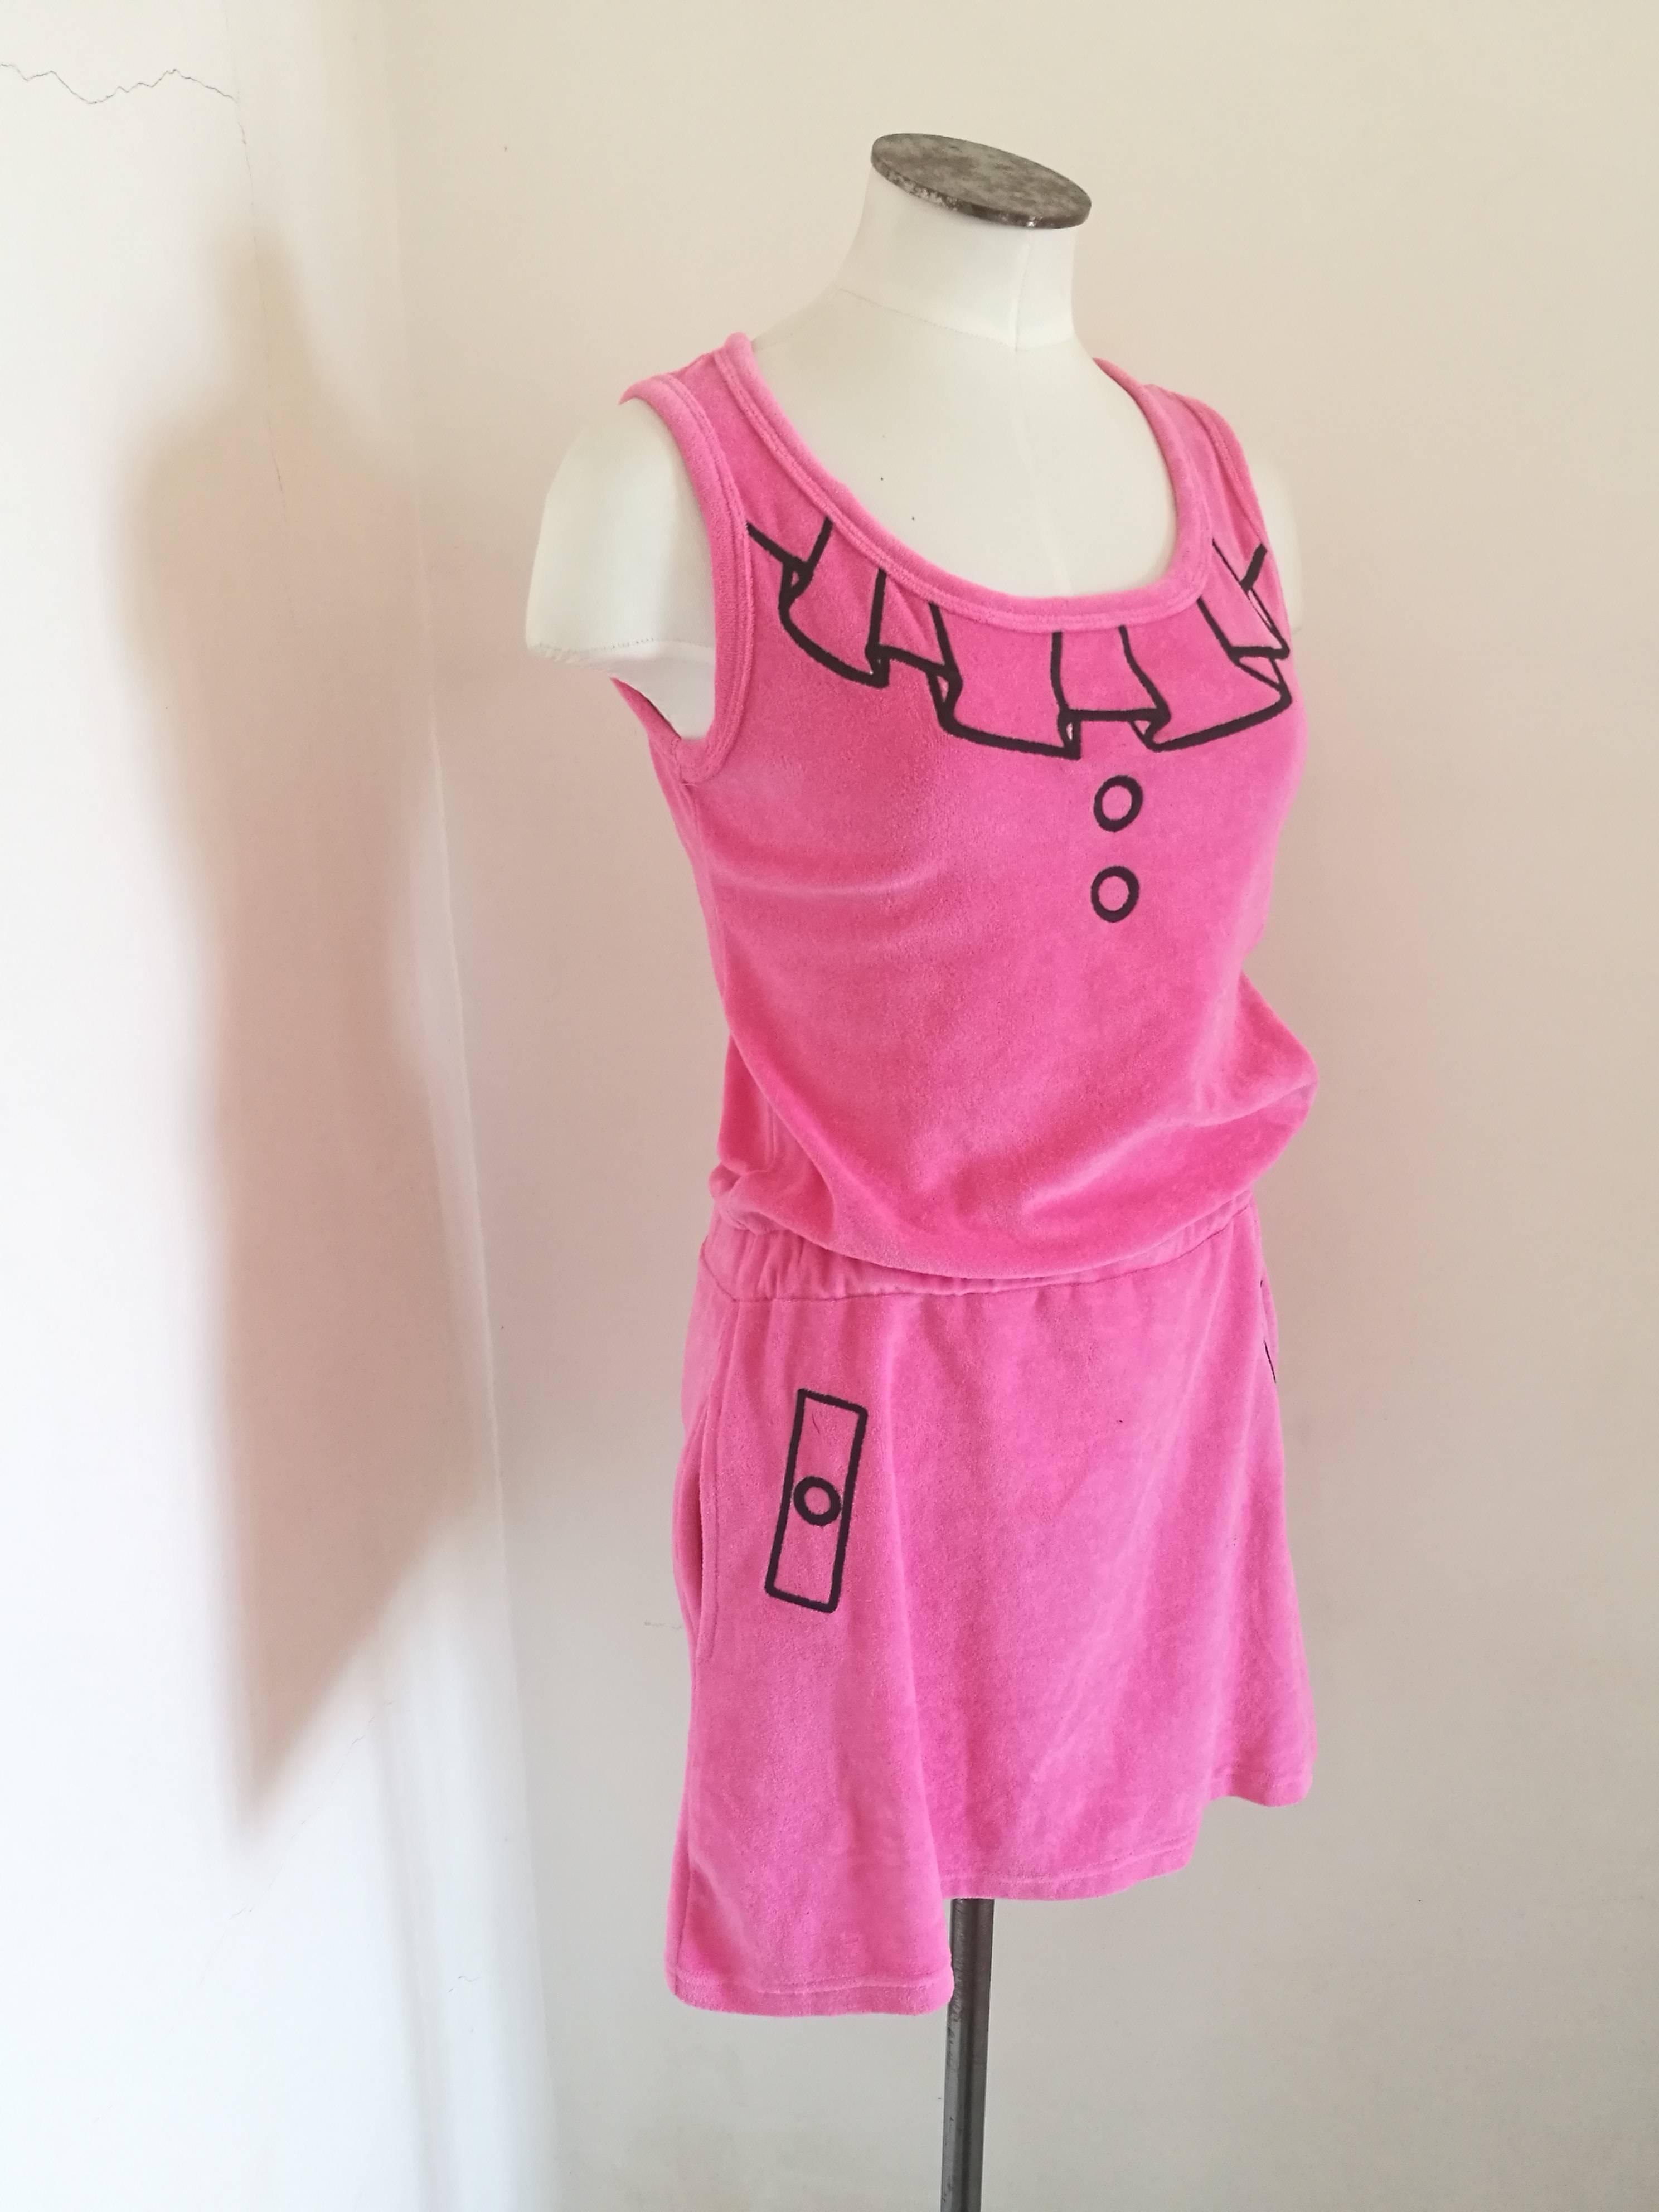 Moschino Swim Pink trompe-l'oeil Dress
Composition: Cotton and polyester
totally made in italy in italian size range 40
